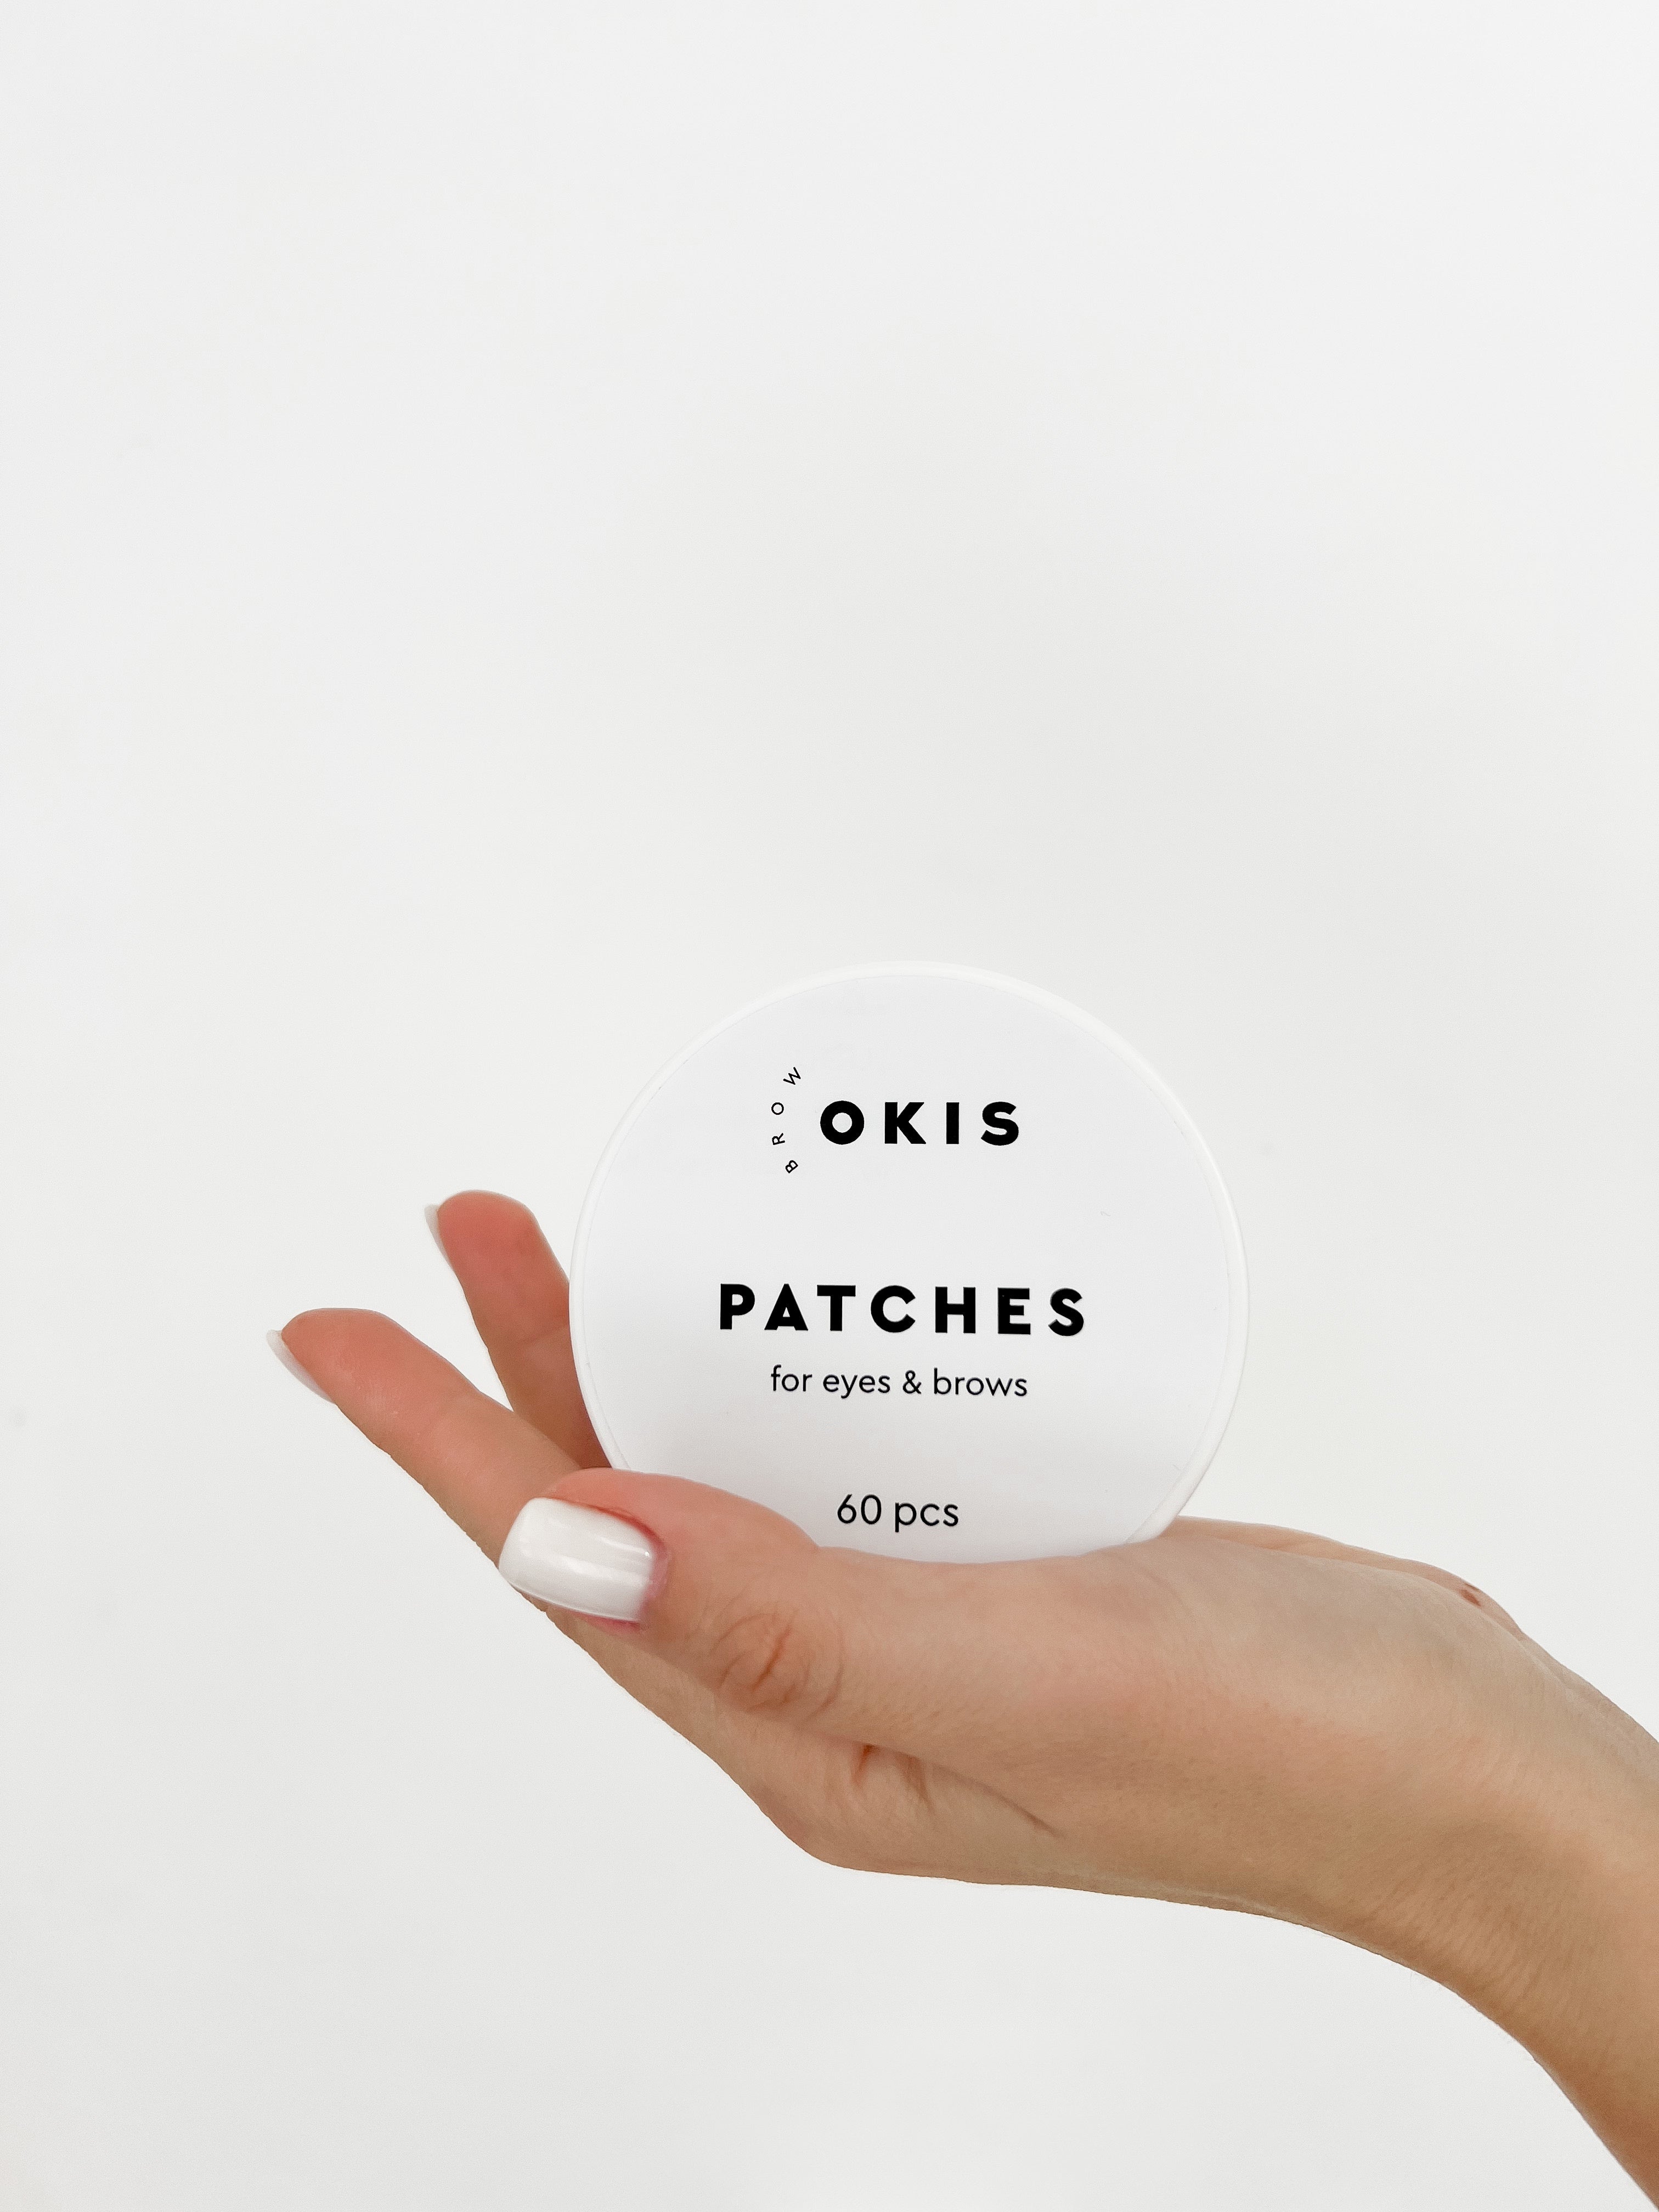 Okis Patches for eyes and eyebrows